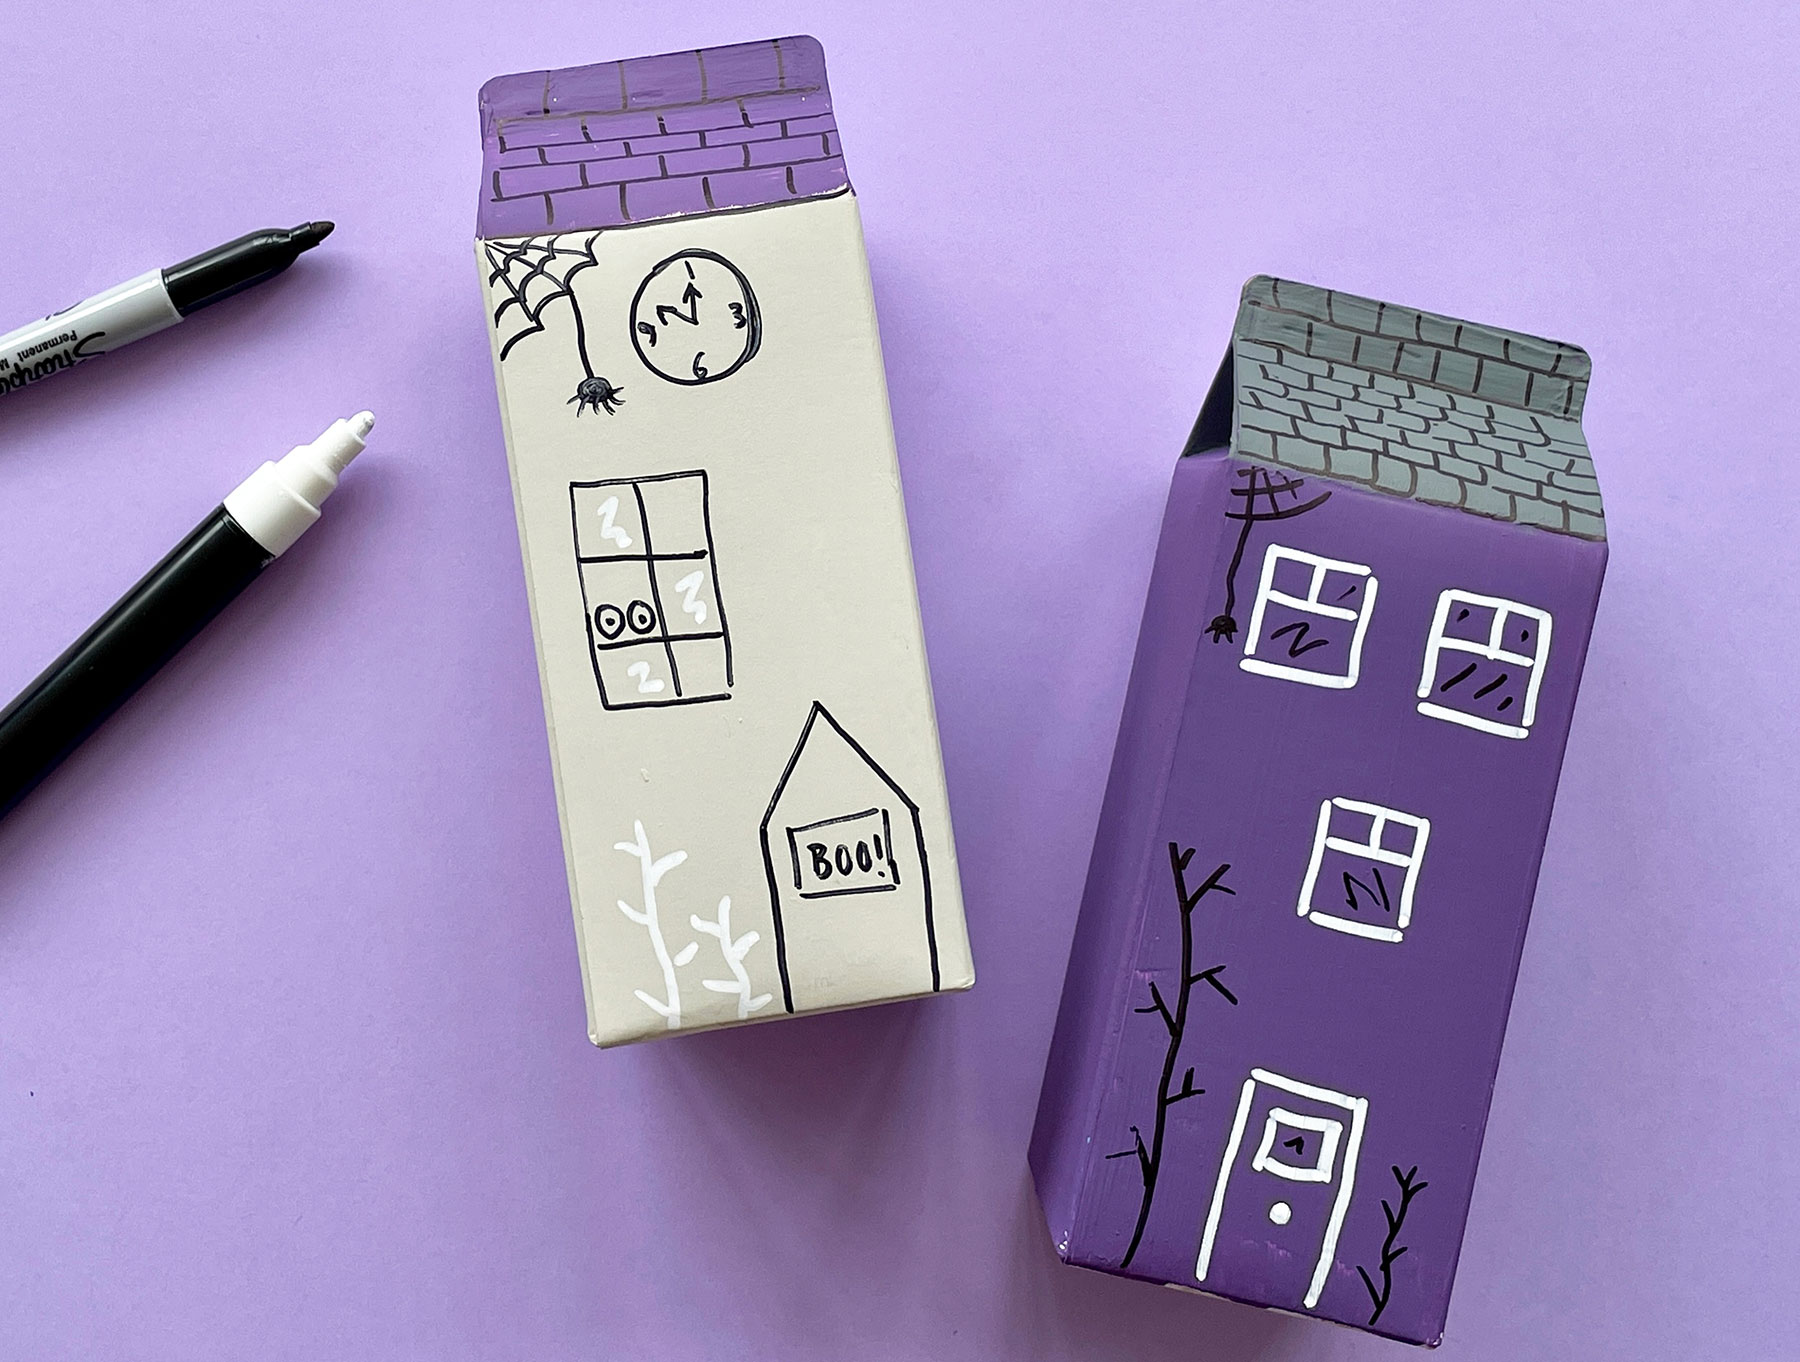 A photo of two painted cartons have windows, doors and other house features drawn on them with a black and white sharpie